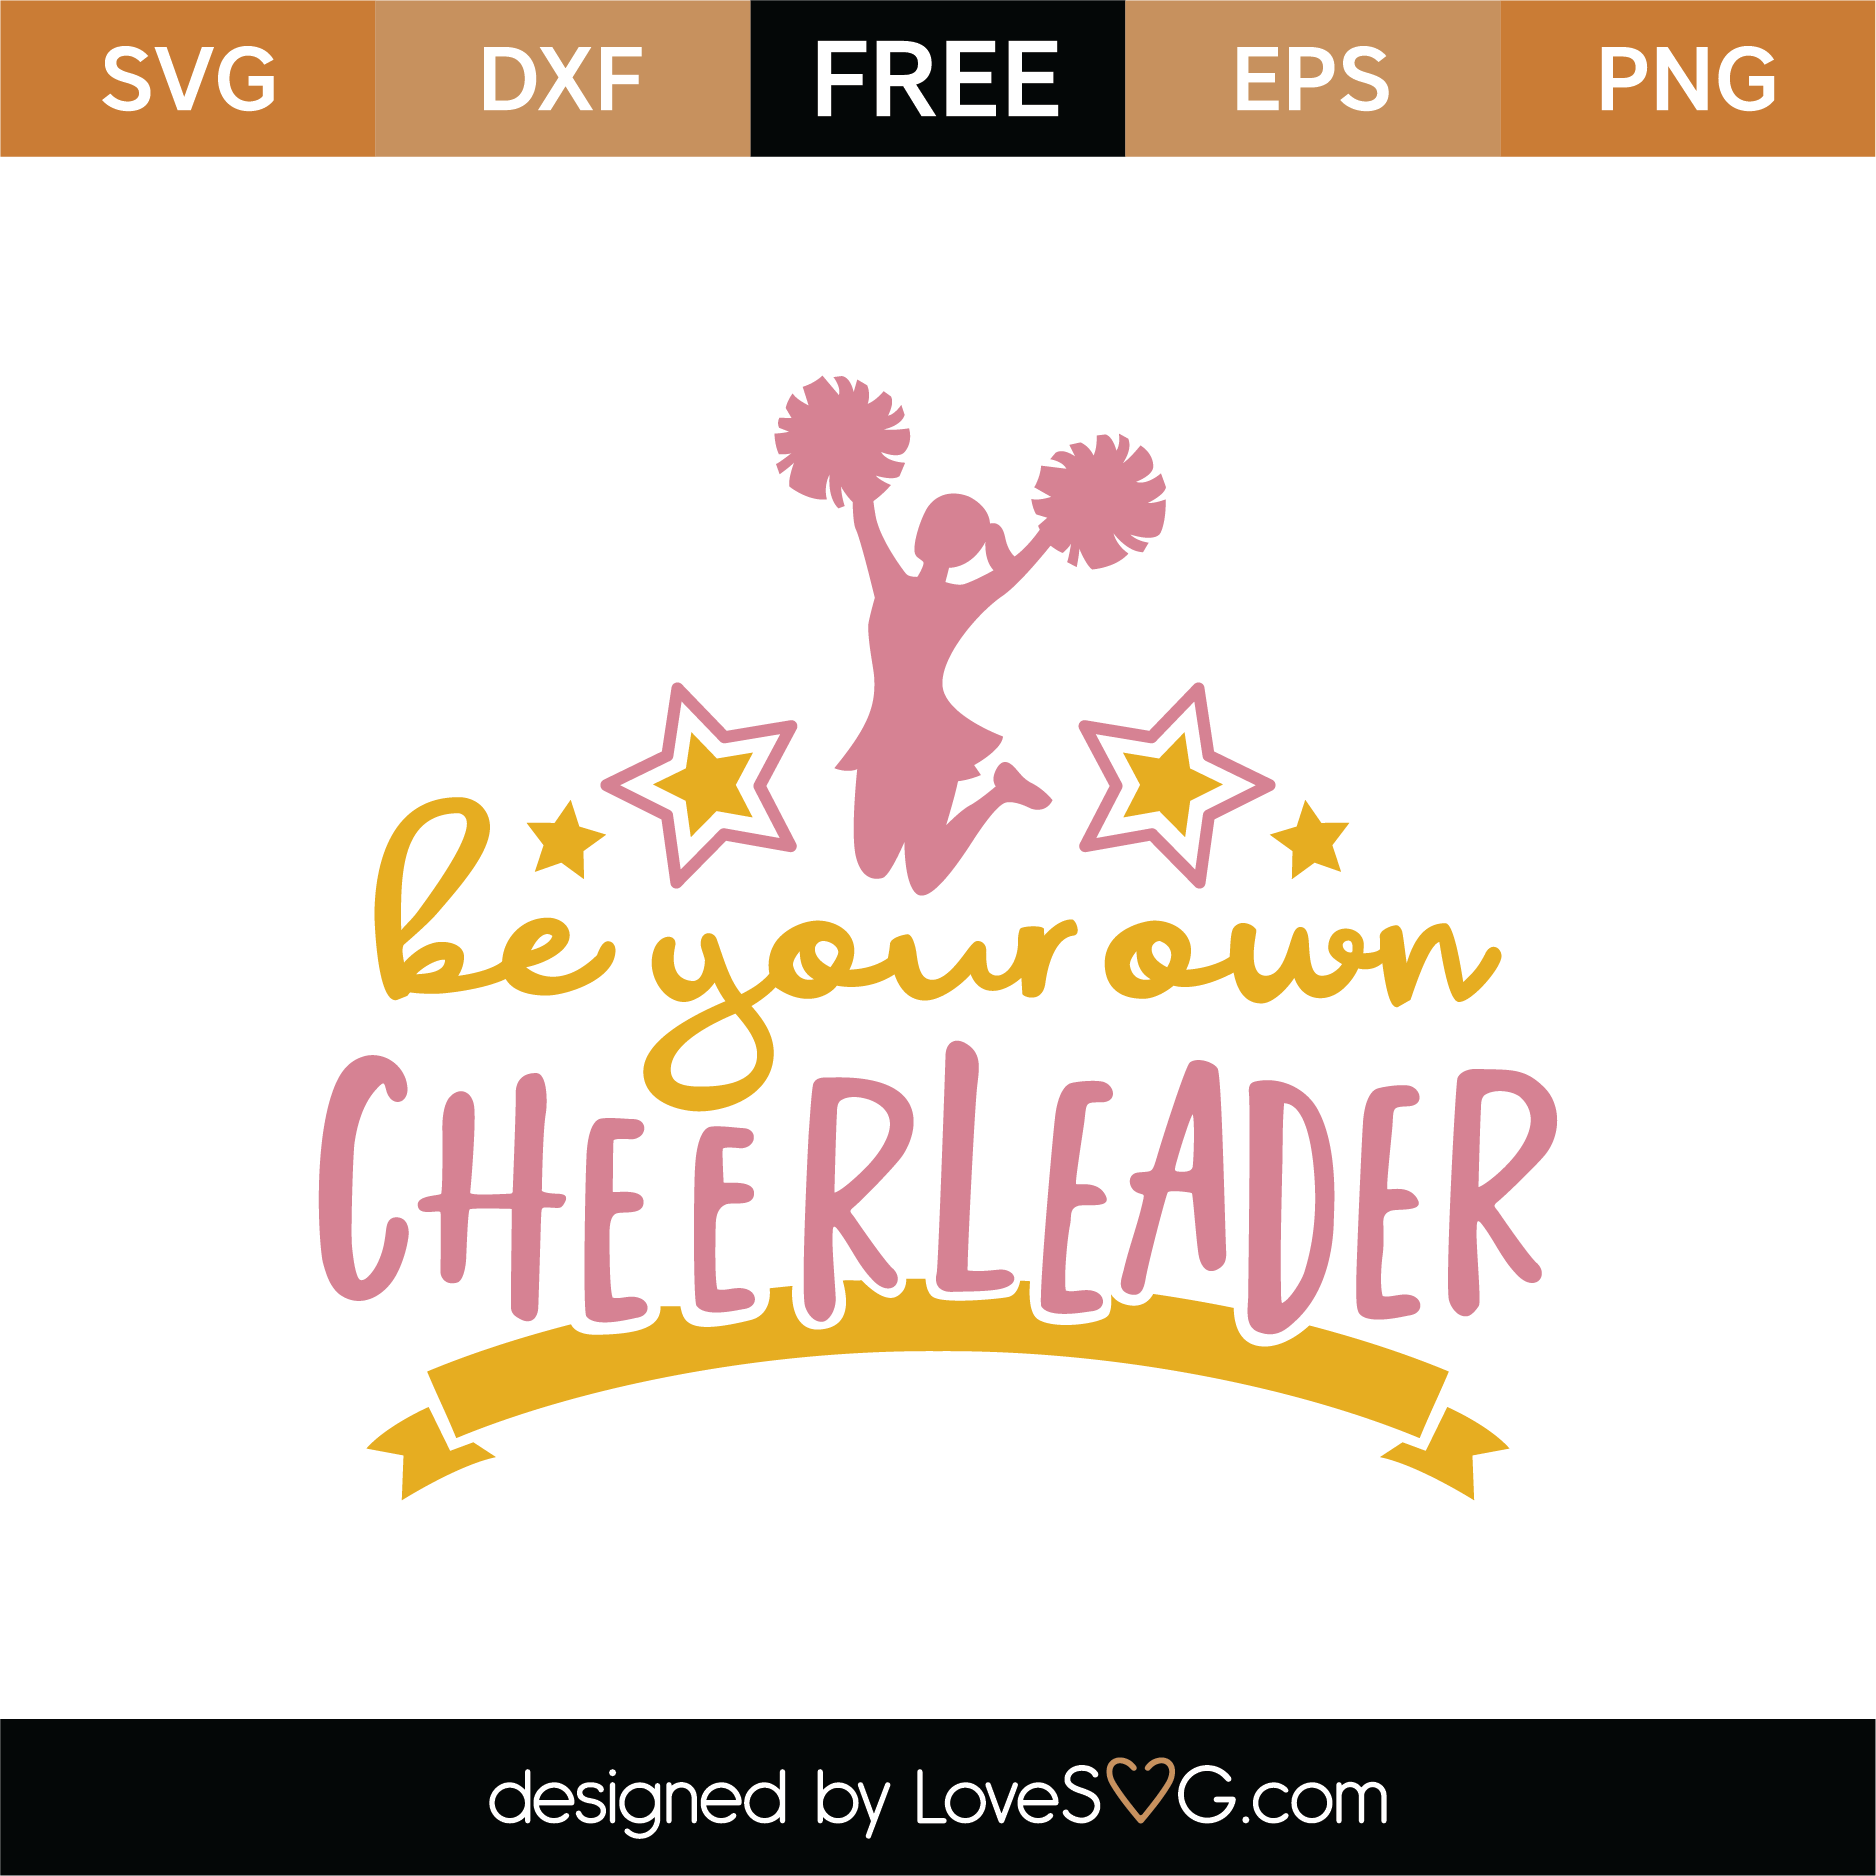 Download Free Be Your Own Cheerleader SVG Cut File | Lovesvg.com